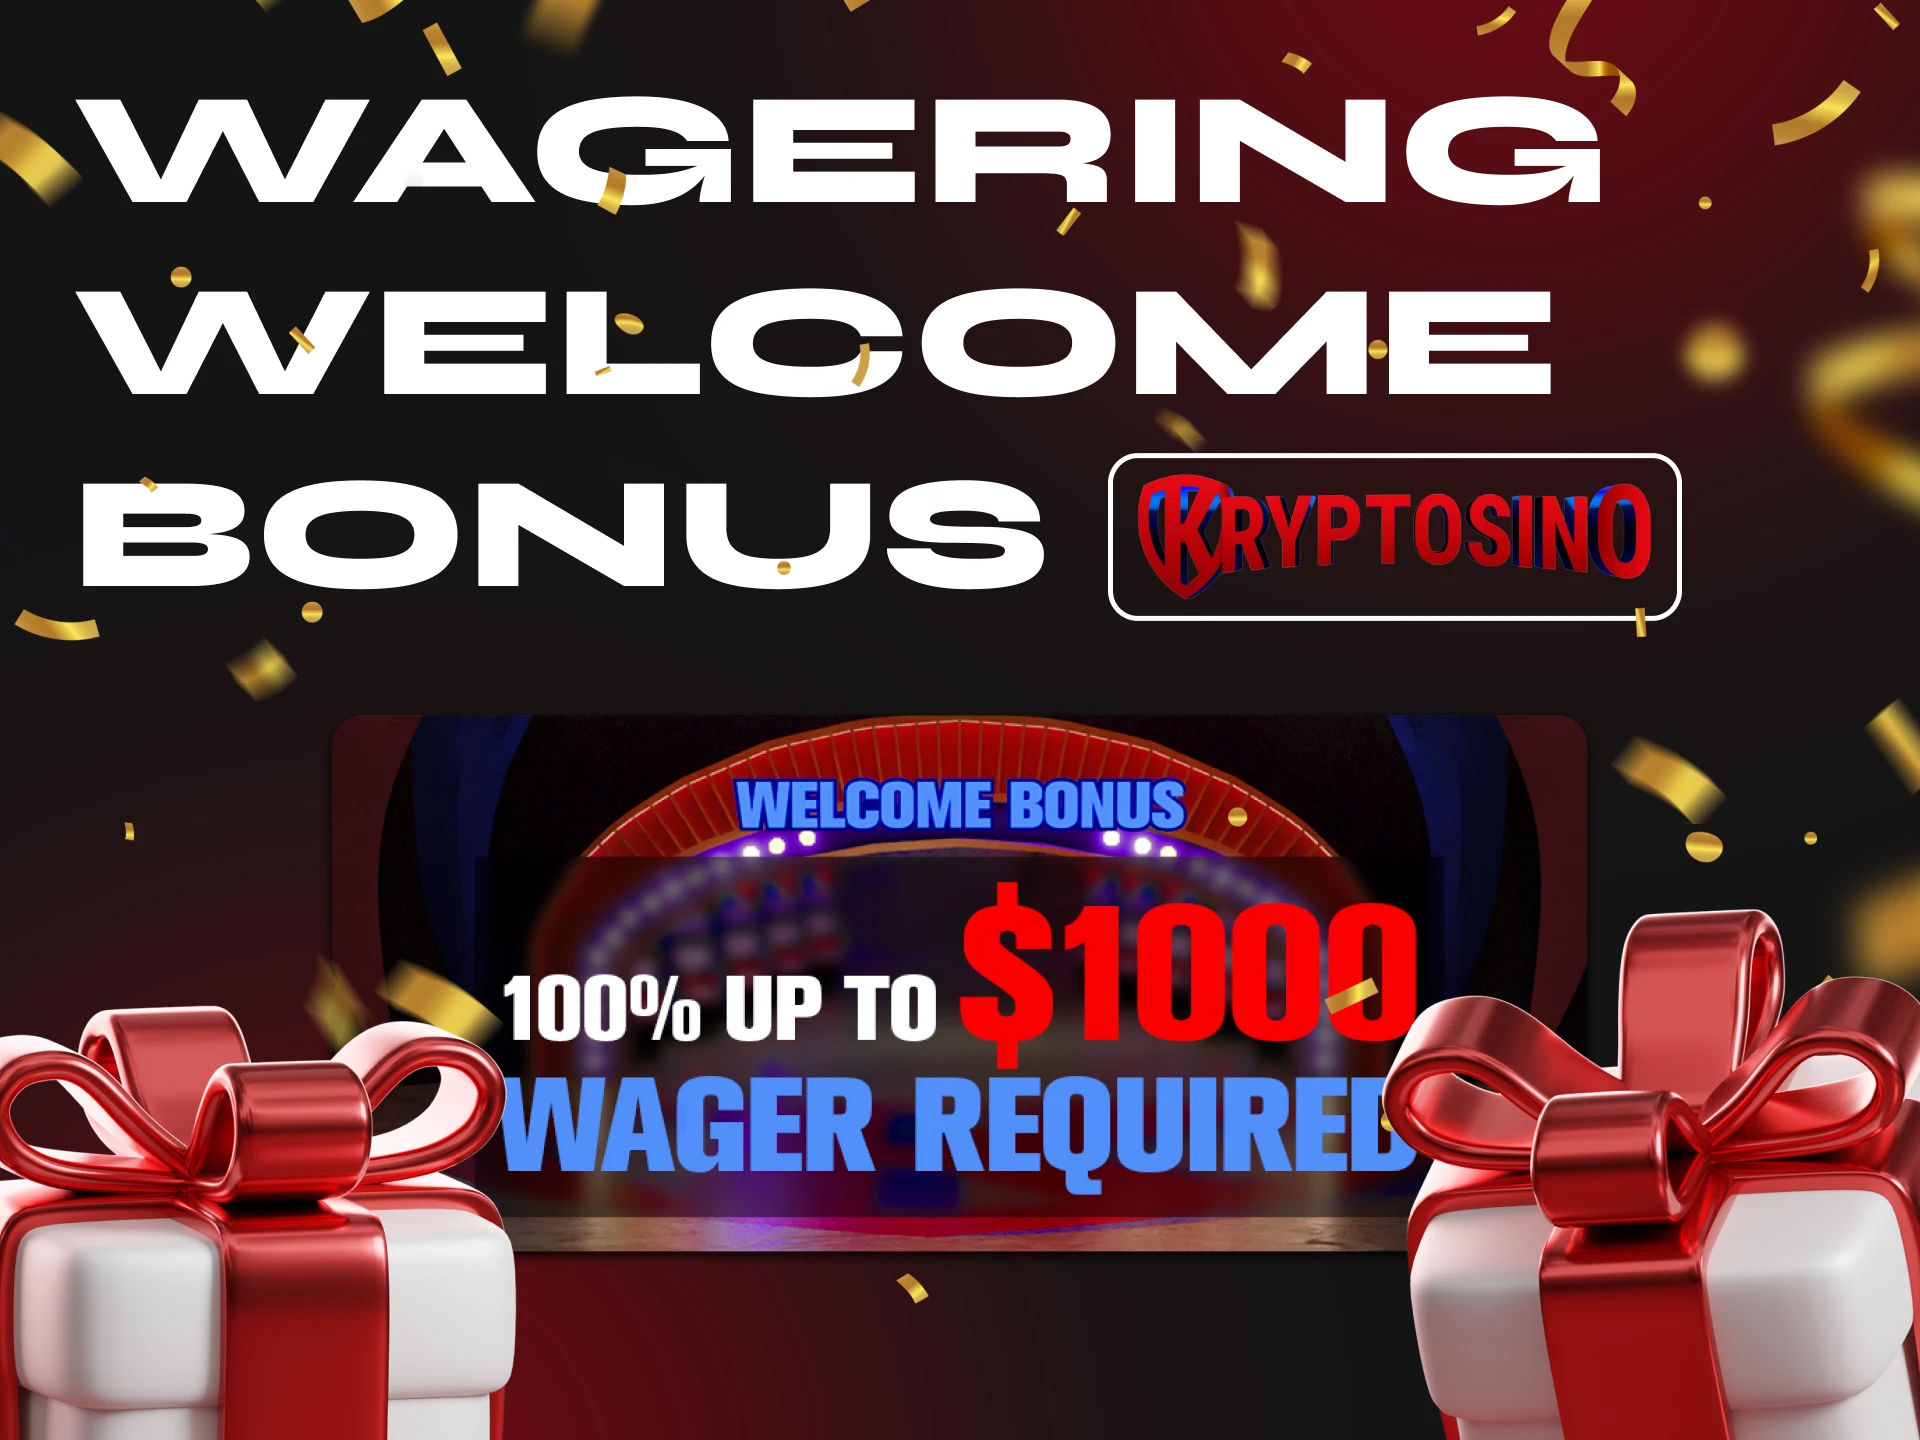 Receive a guaranteed first deposit after registering at Kryptosino Casino.